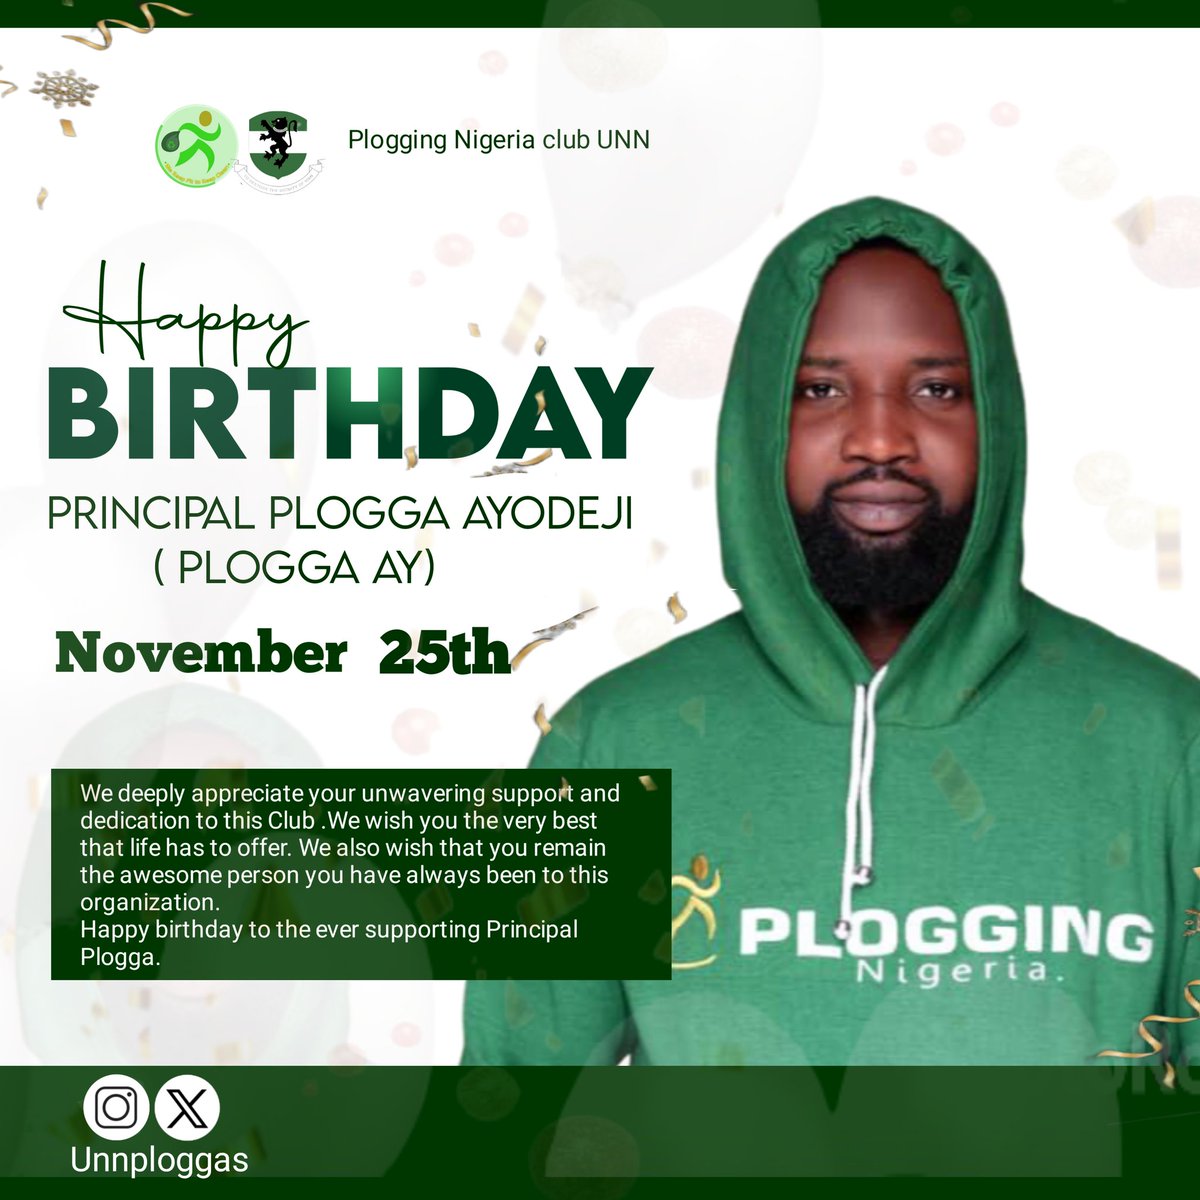 Our Principal Plogga @Omilabuhaywhy got balloons today! 🎈🎈🎊🎊 Thank you for all you do, and wishing you many sustainable years sir. #PloggingNigeria #PloggingNigeriaClubUNN #WeKeepFitToKeepClean #FitPeoplelnCleanCommunities